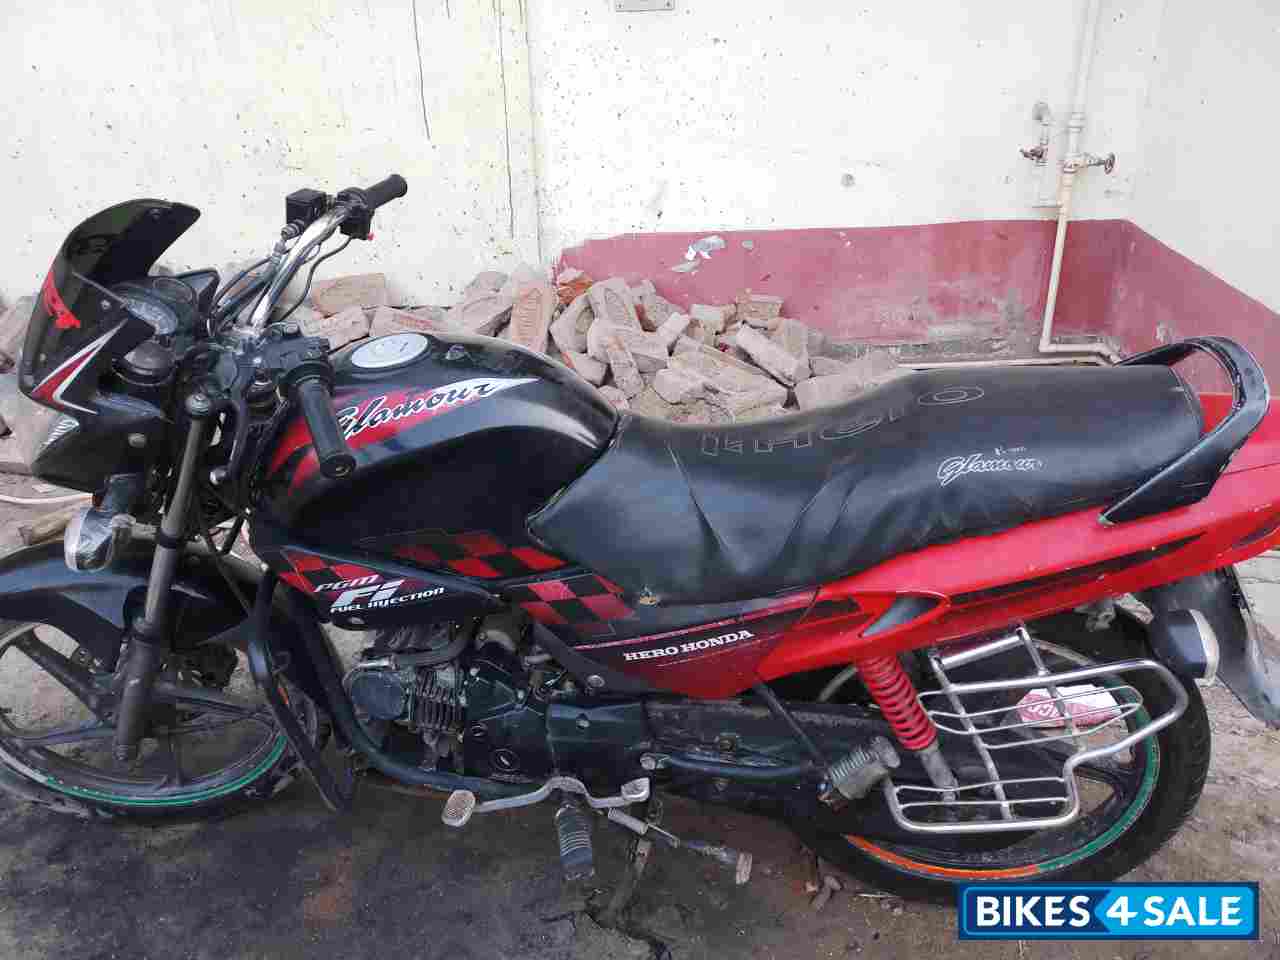 Used 2008 Model Hero Glamour Pgm Fi For Sale In Patna Id 261824